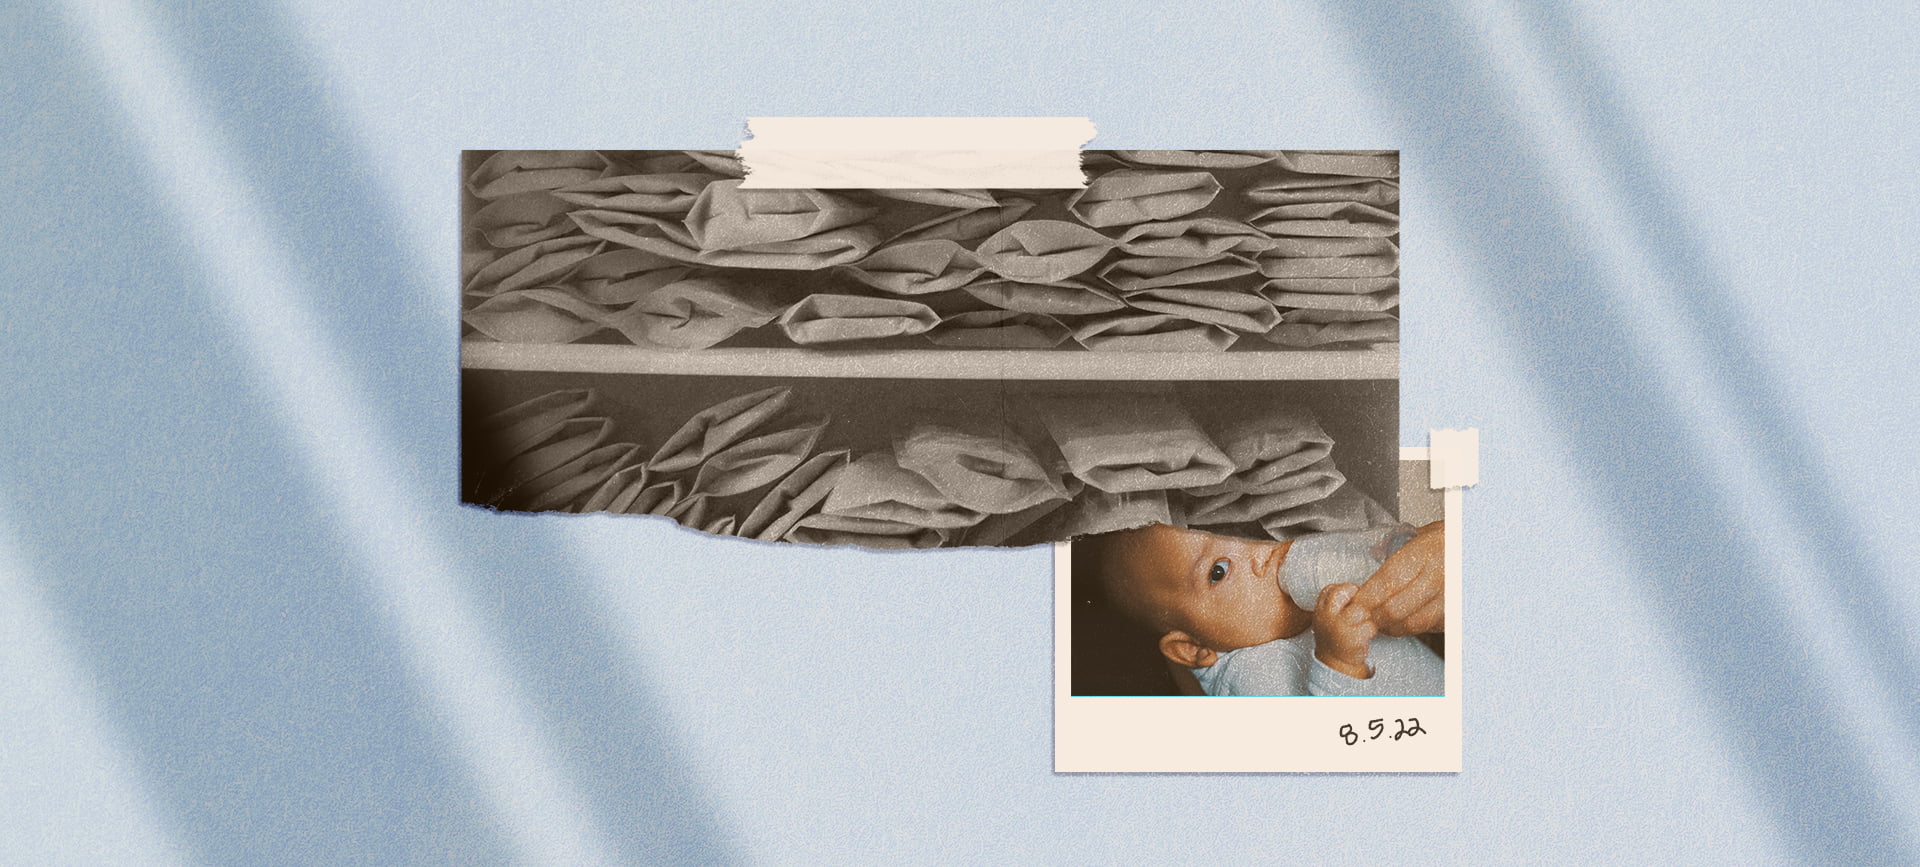 A picture of breast milk supply on a shelf is taped next to a picture of a baby drinking breast milk.